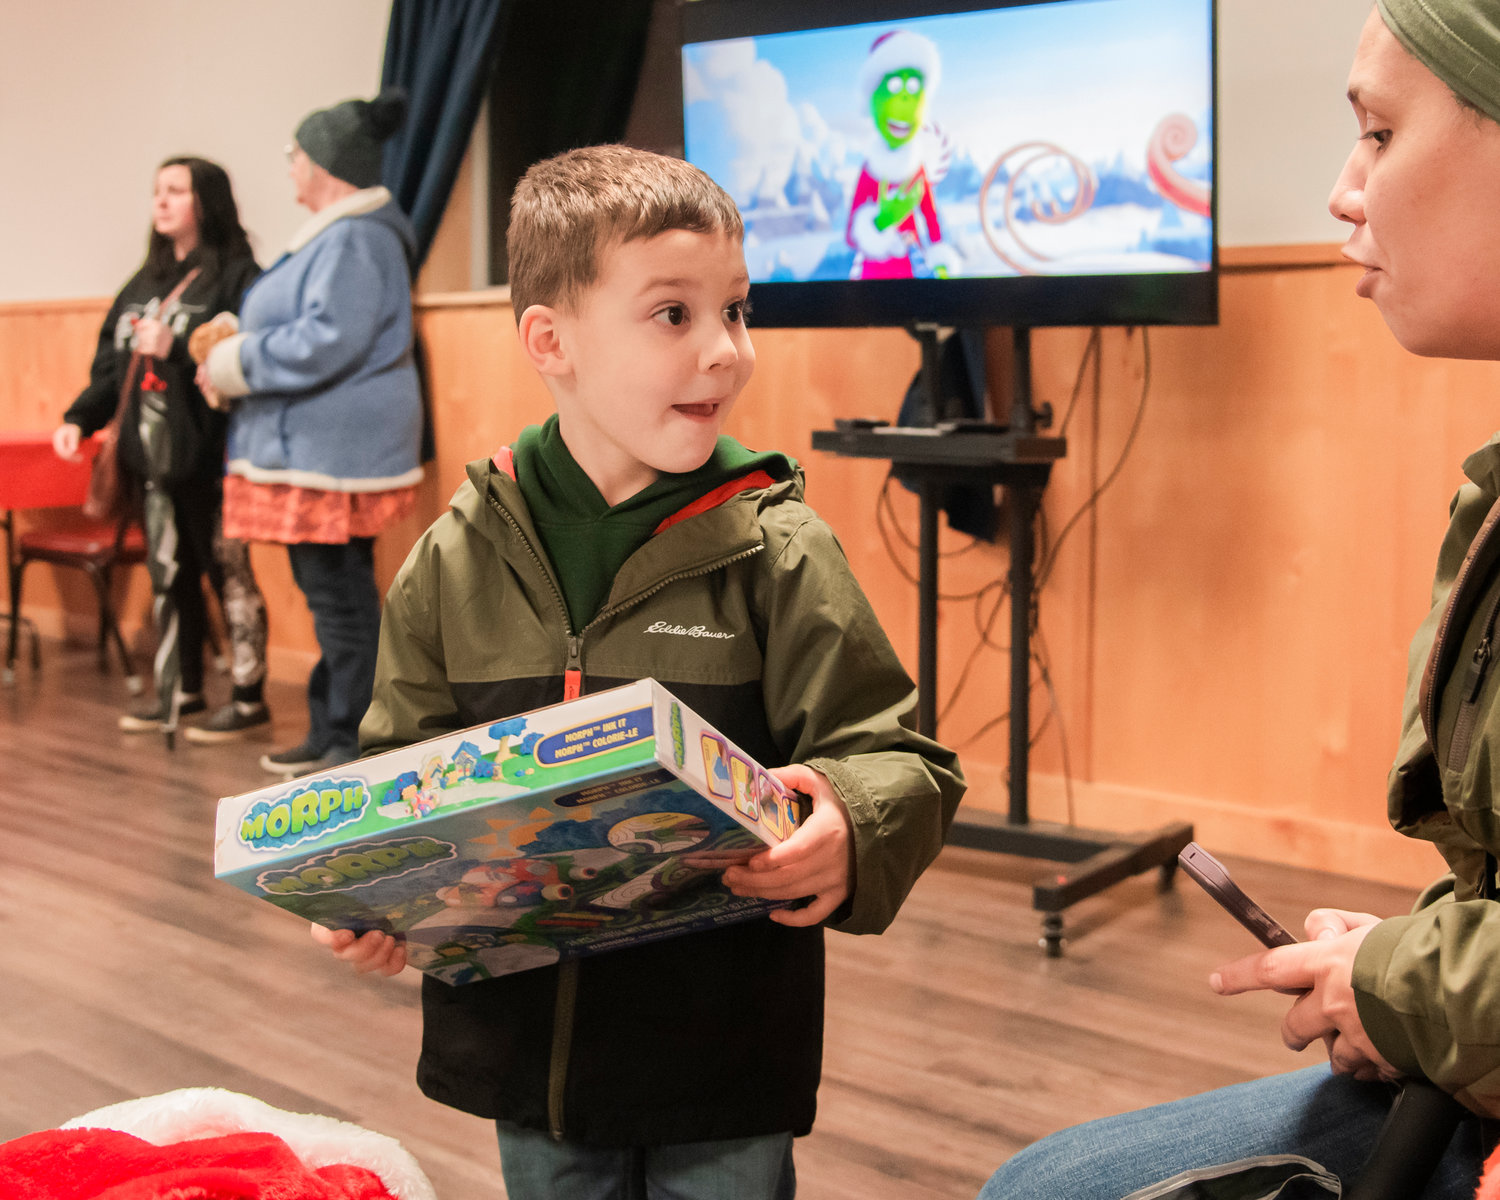 Clayton, 4, holds up his prize at the Mossyrock Community Center during a tree lighting ceremony and gift raffle Saturday night as Dr. Suess’ the Grinch animated movie plays in the background.